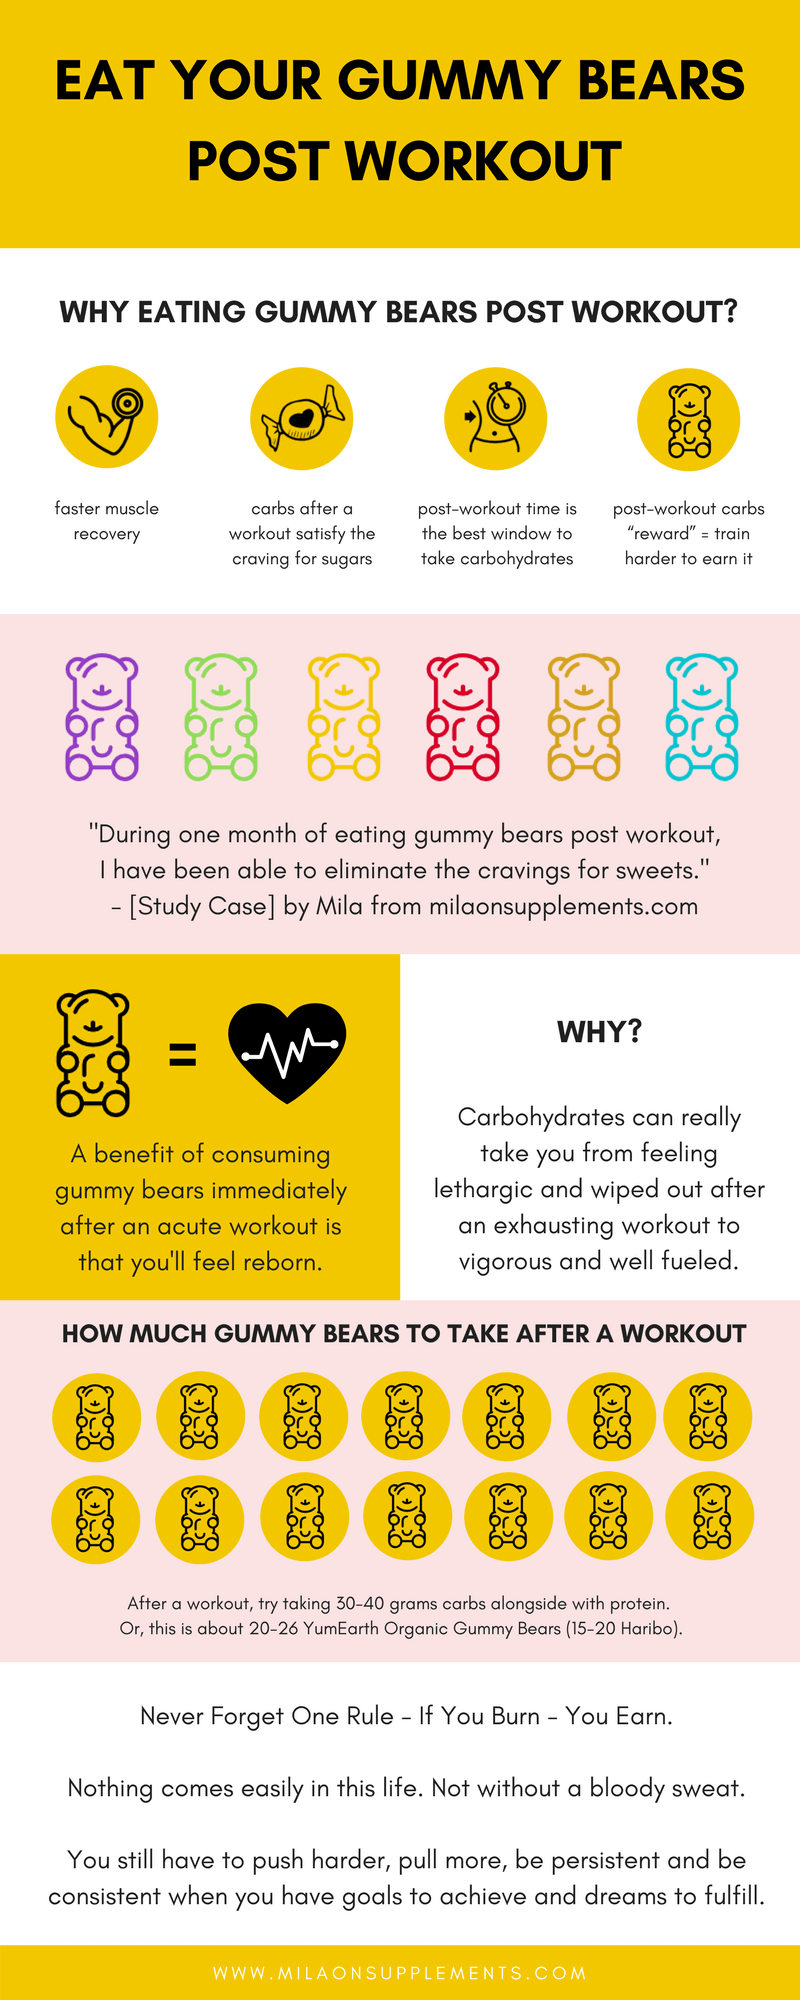 Eating Gummy Bears Post-Workout for Better Recovery